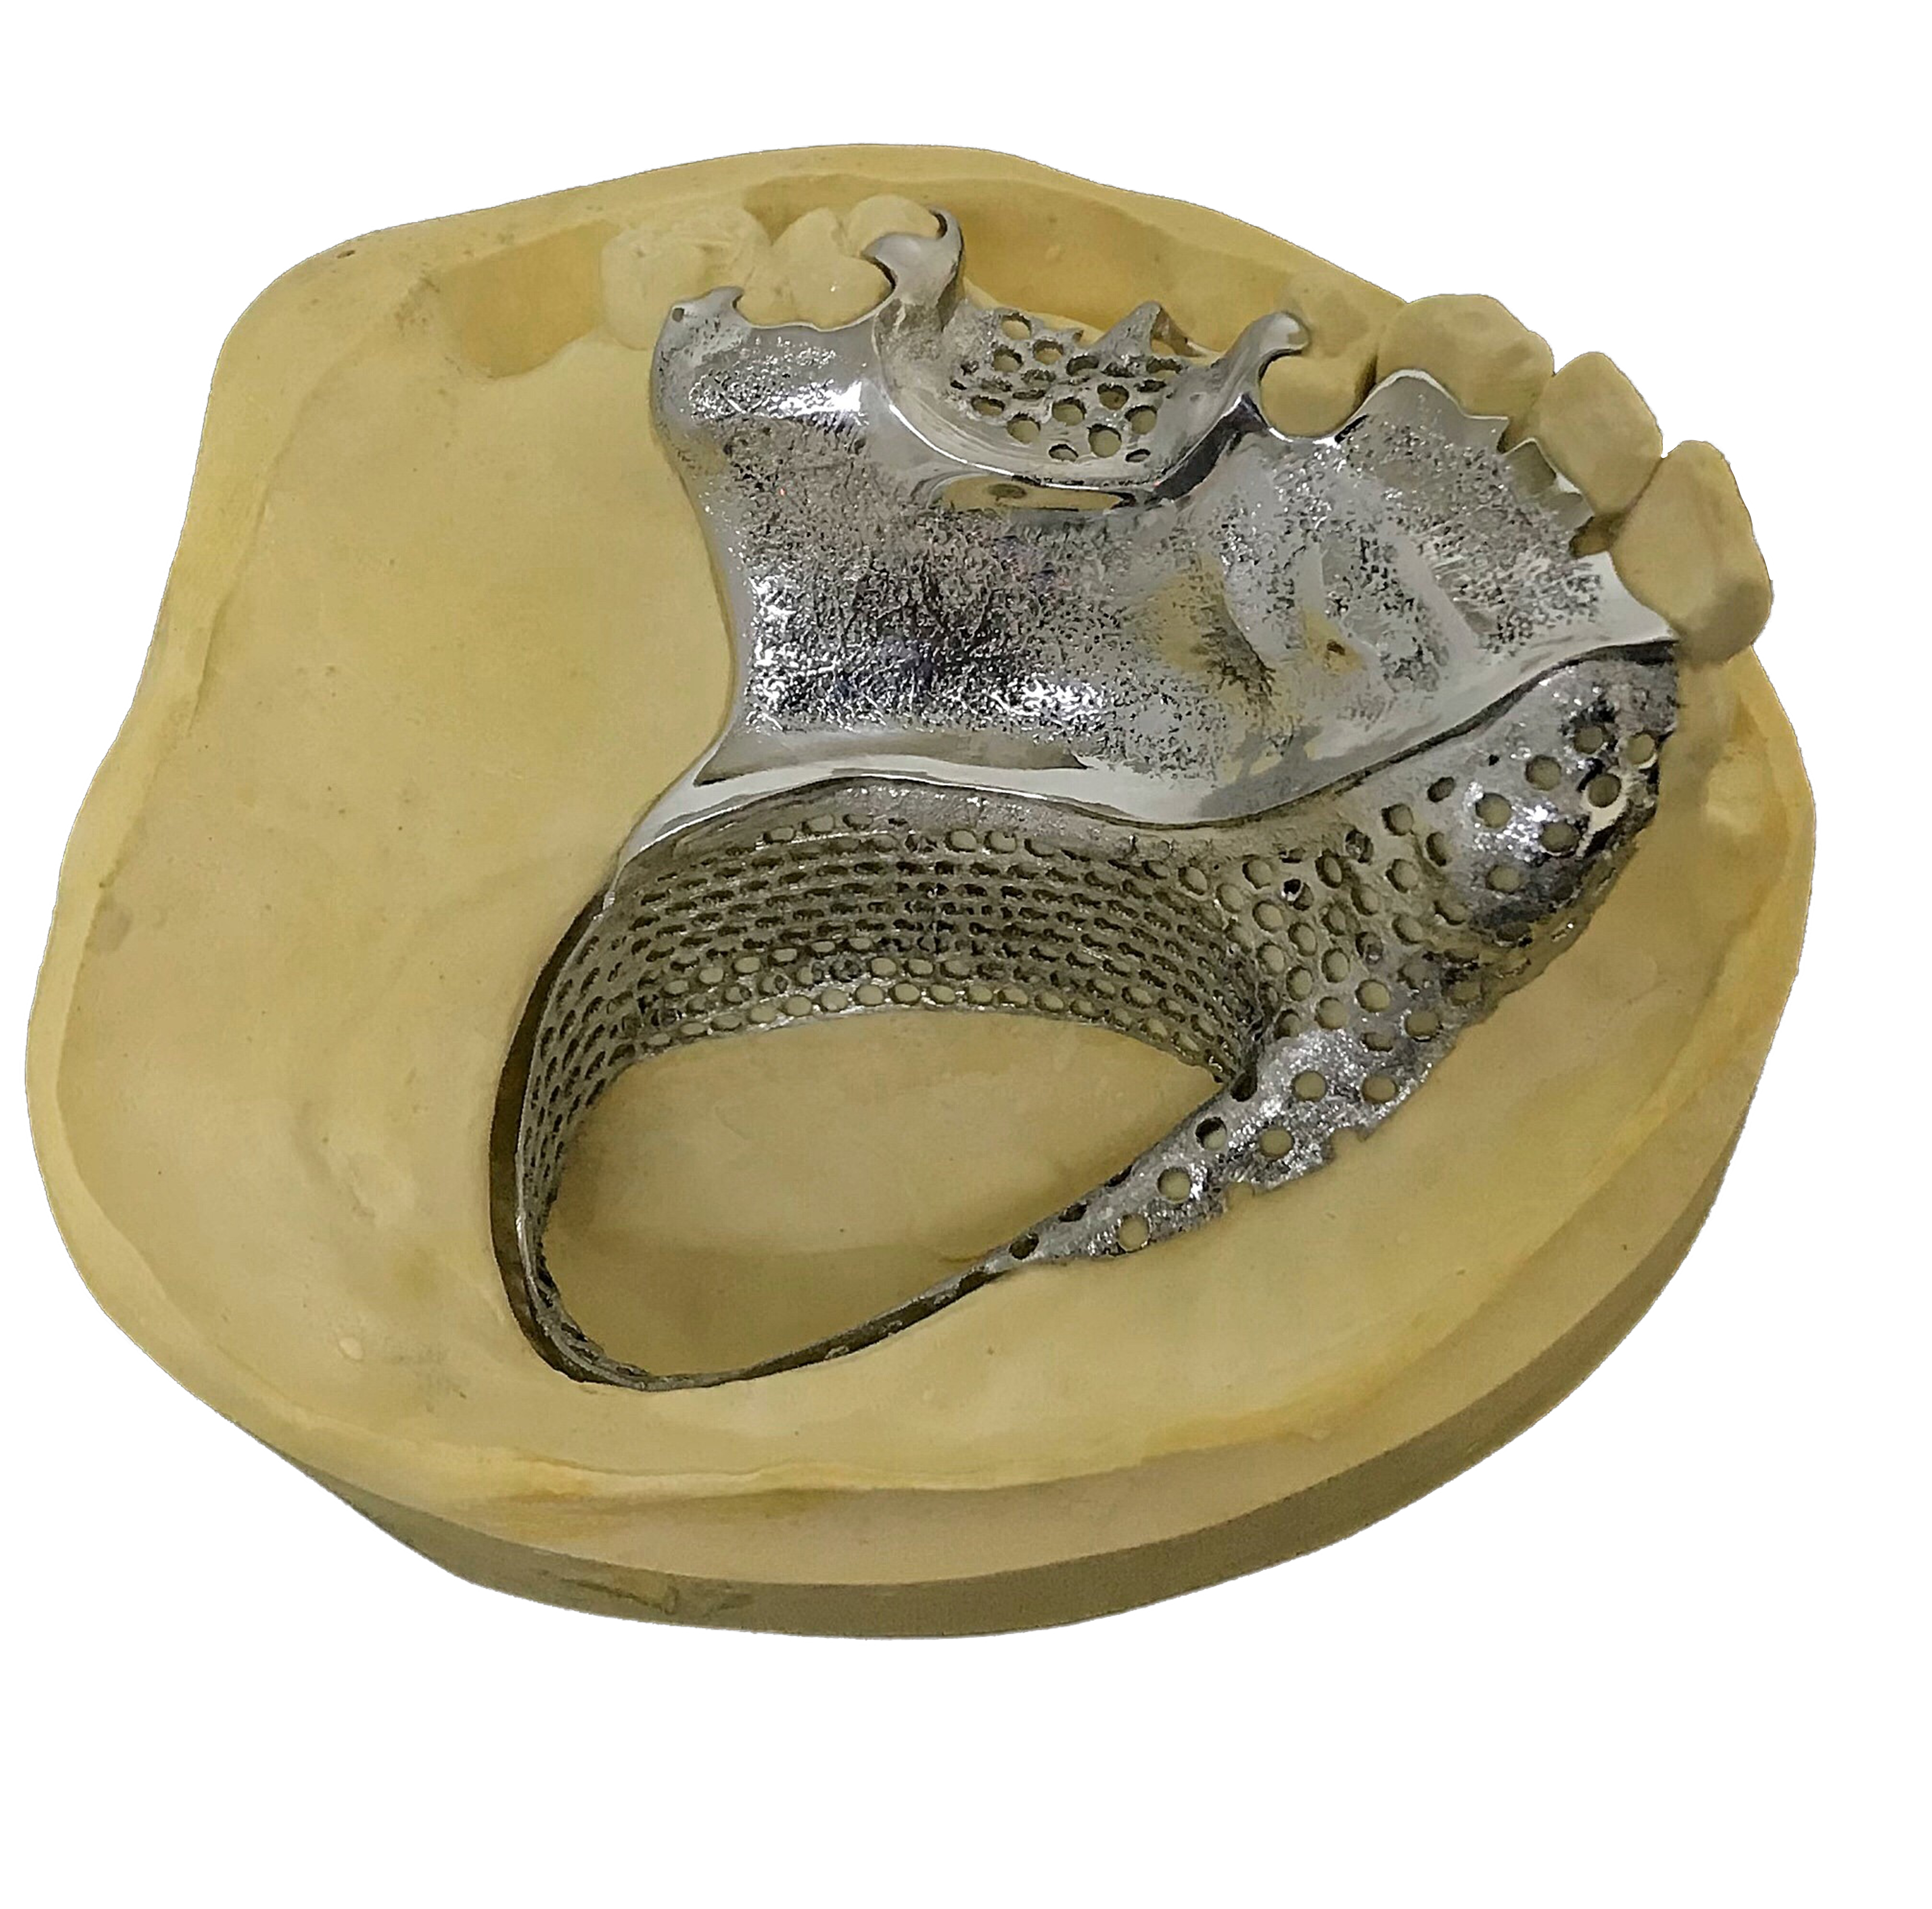 Removable partial denture incorporating a palatal obturator, design by Gill Egan